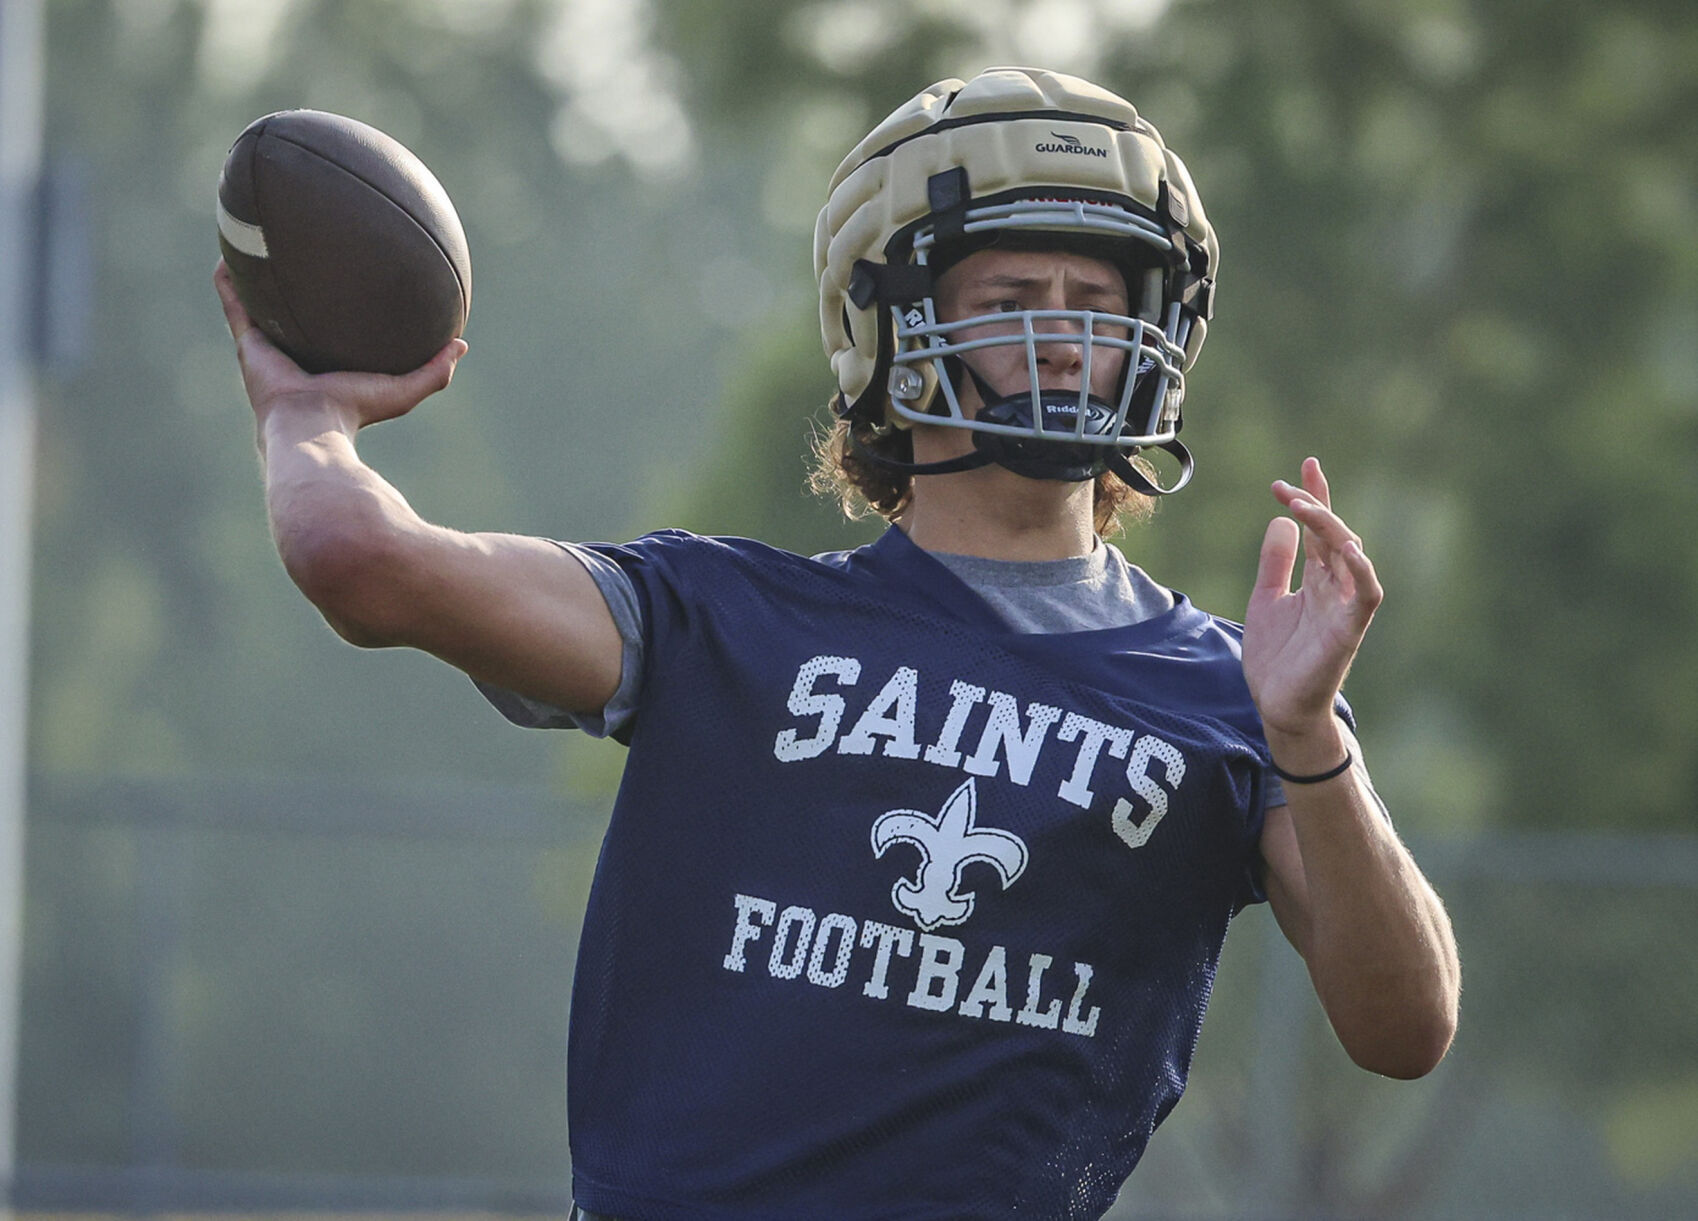 Colin Hayes Becomes the Quarterback for the Fast-Paced Central Catholic Football Team